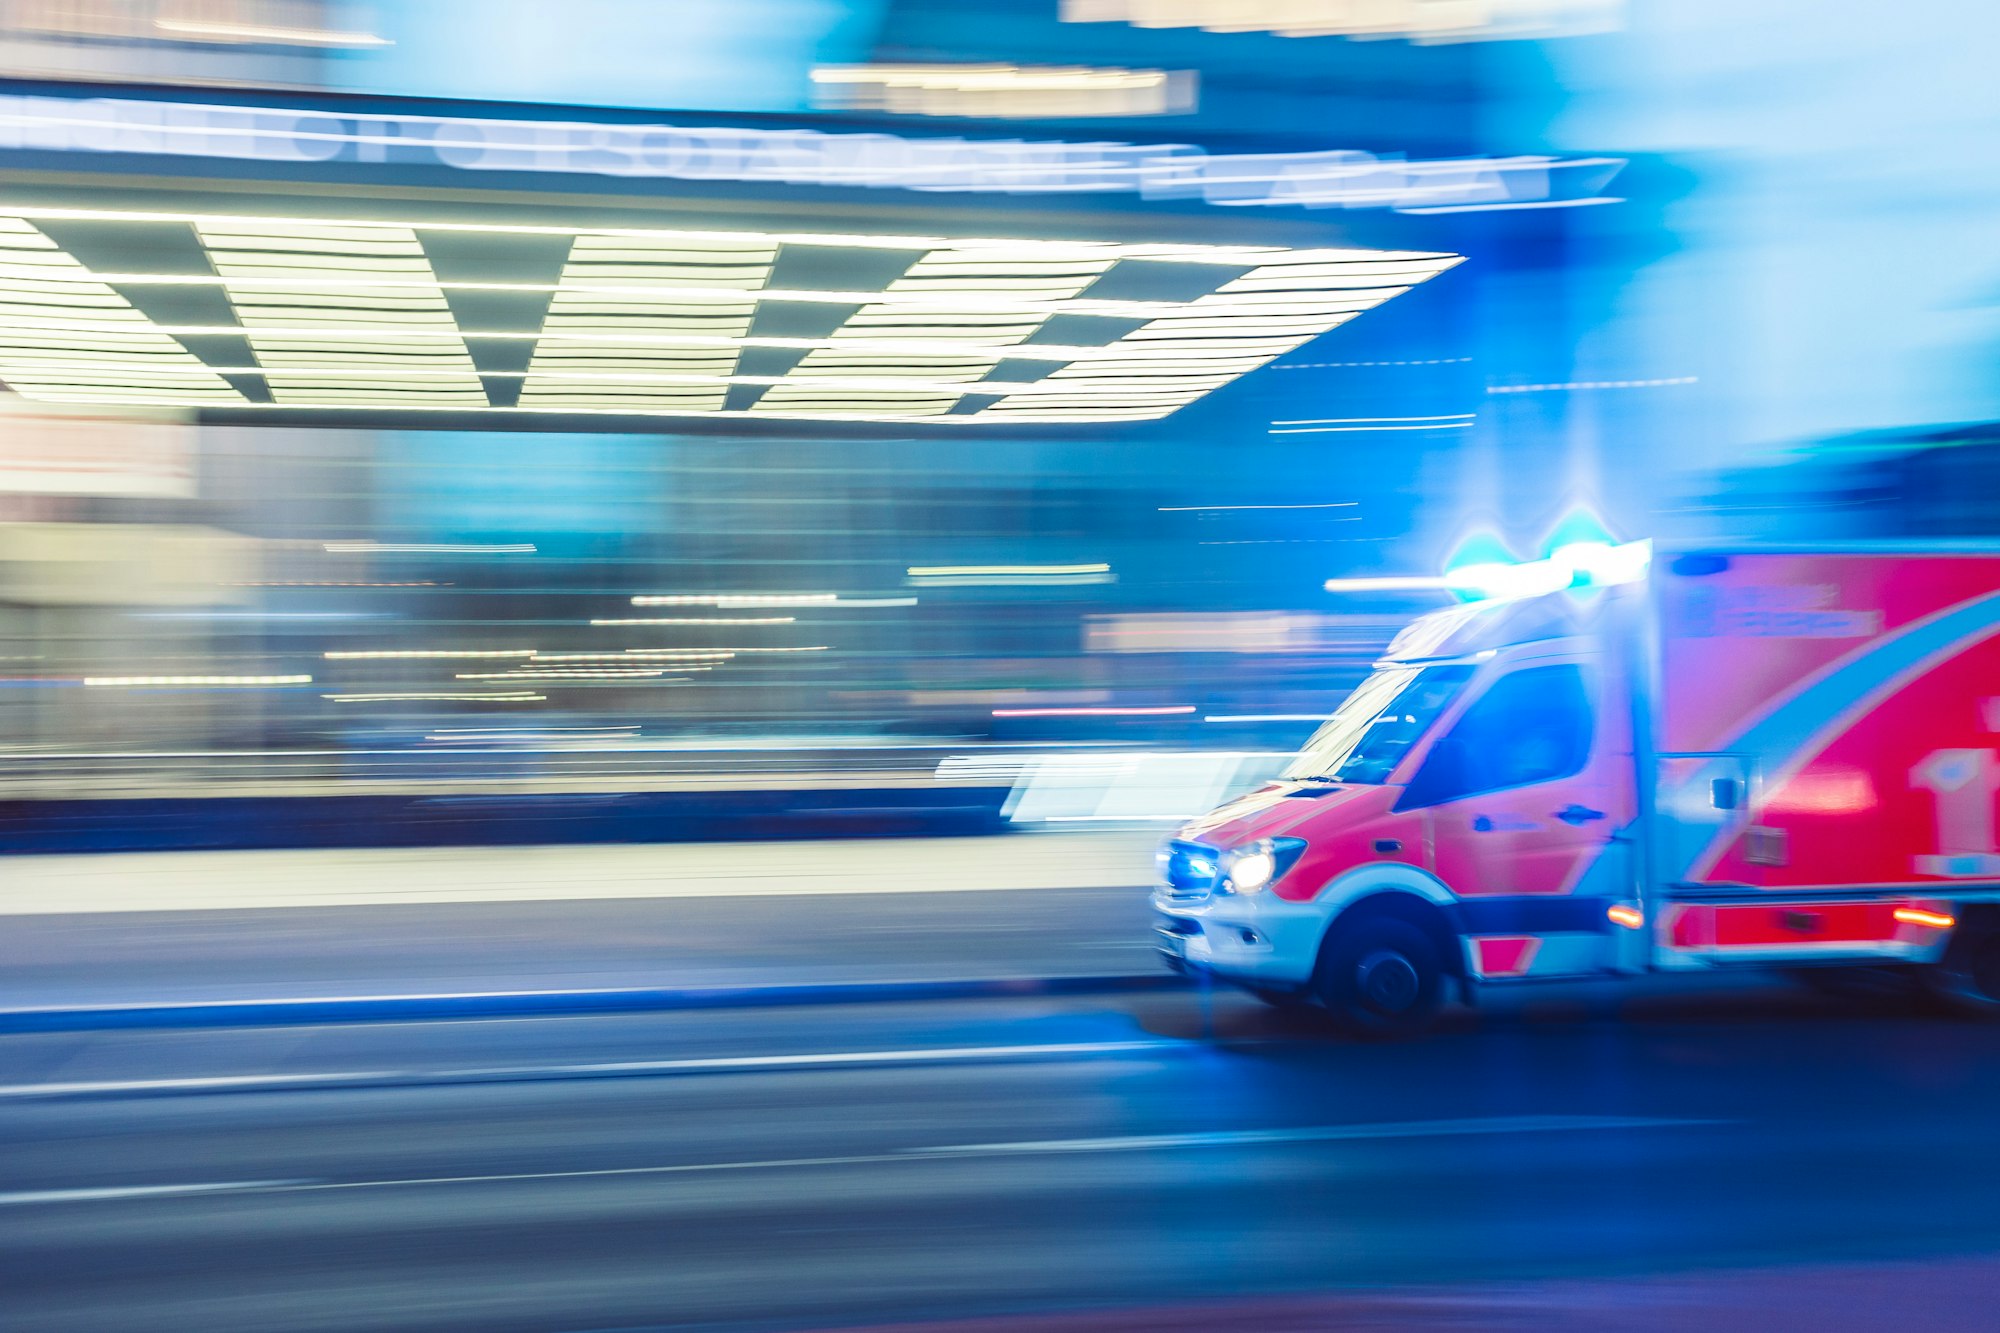 An ambulance rushes to respond to an emergency with blue lights flashing.